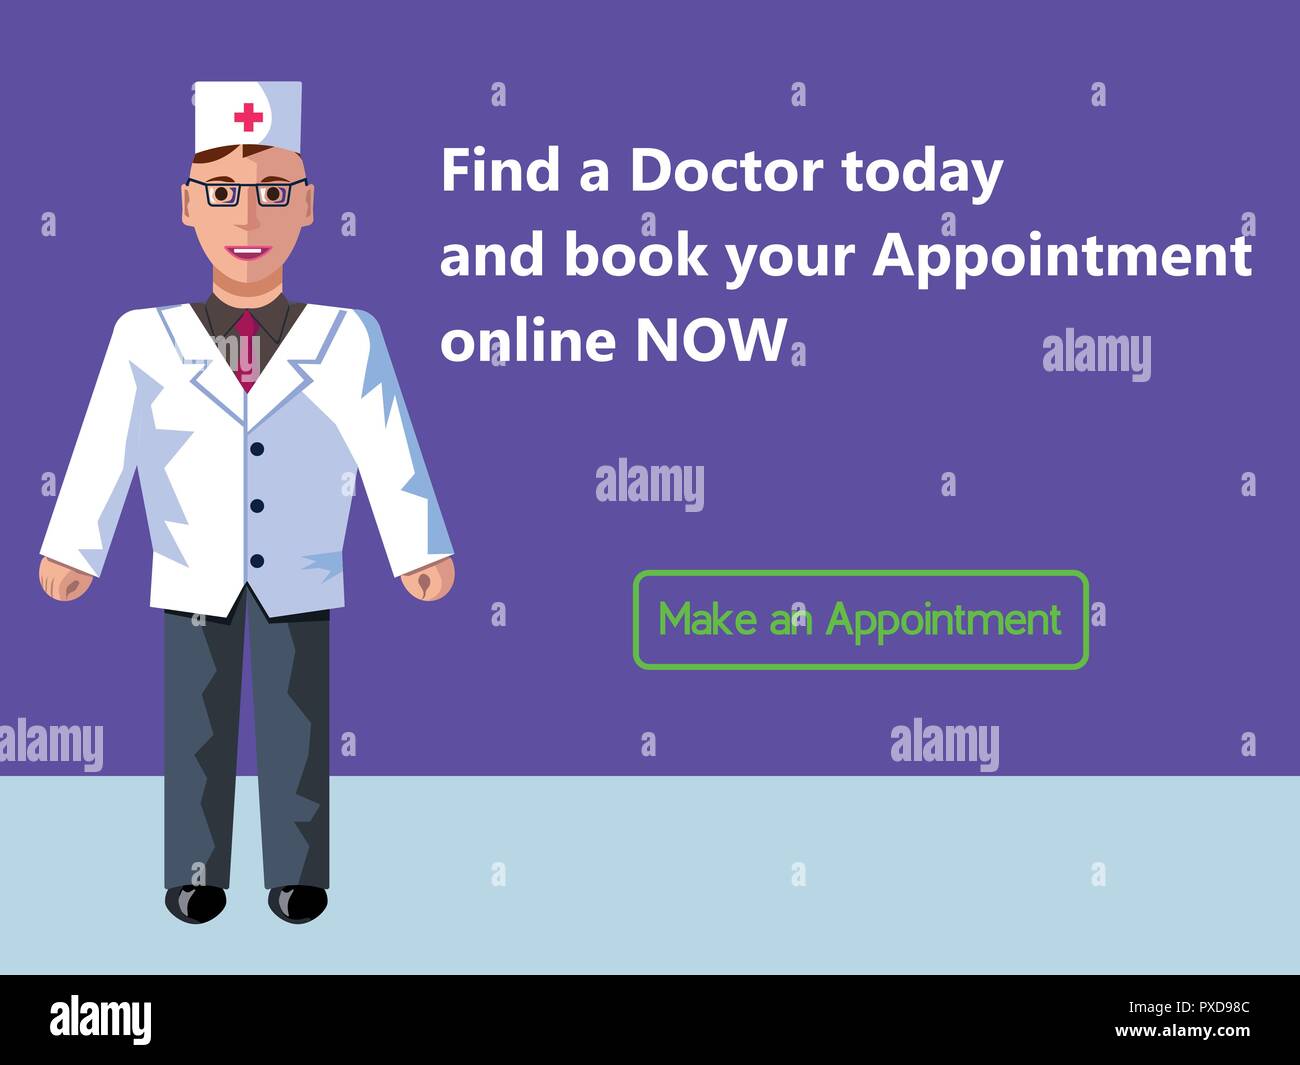 Online medicine. Doctor's appointment. Web banner design consept. Vector flat illustration with purple background. Stock Vector